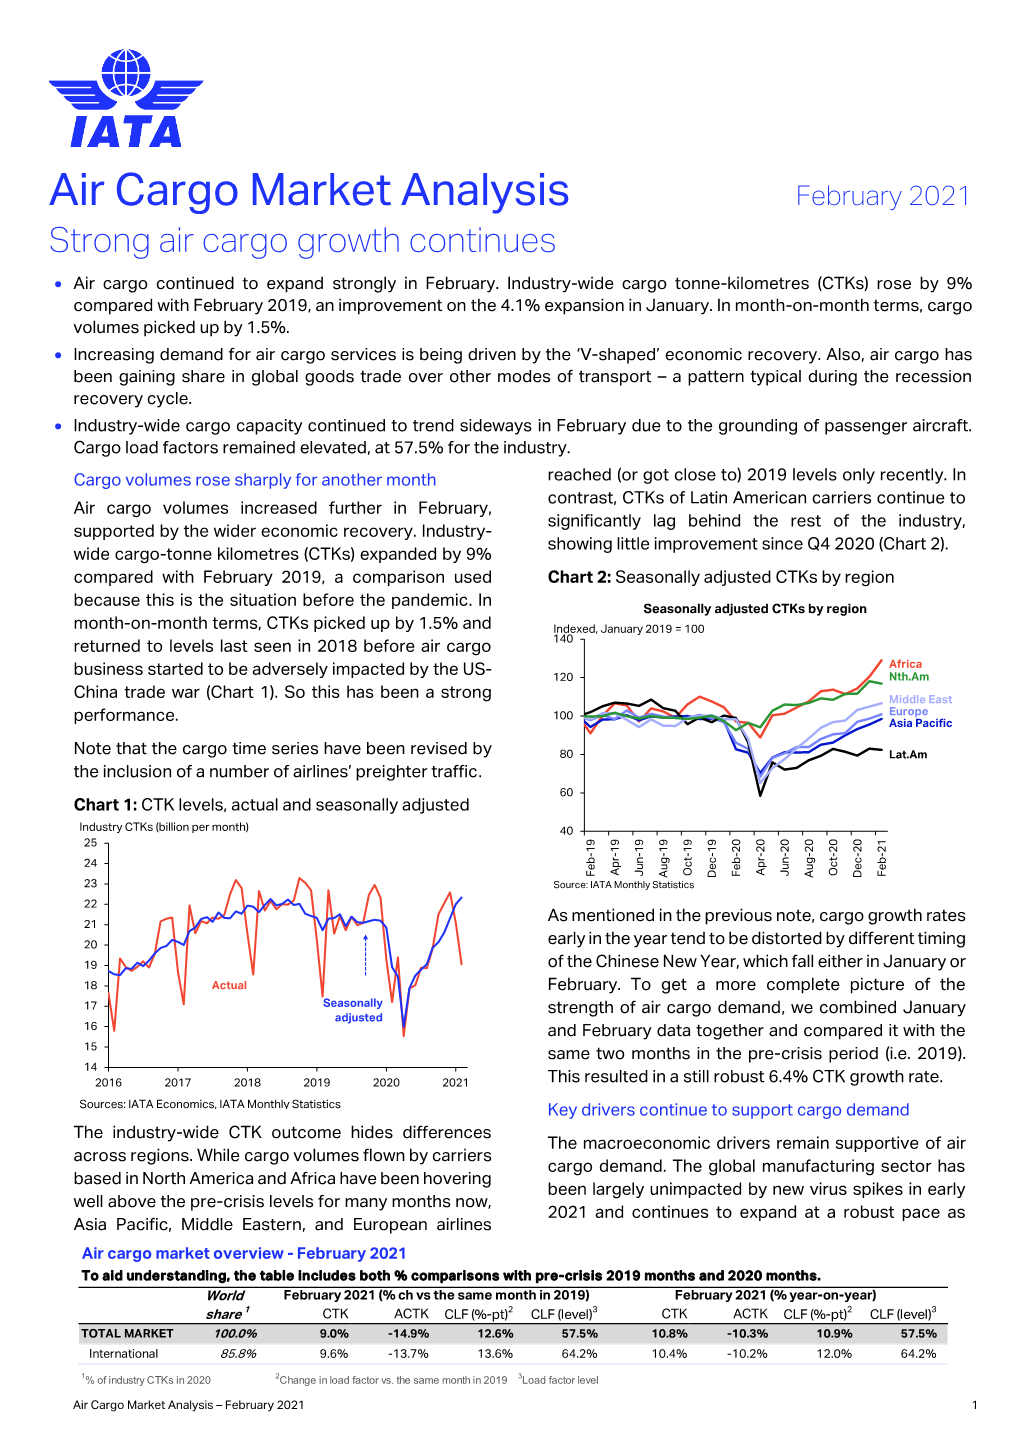 Air Cargo Market Analysis February 2021 Strong Air Cargo Growth Continues • Air Cargo Continued to Expand Strongly in February